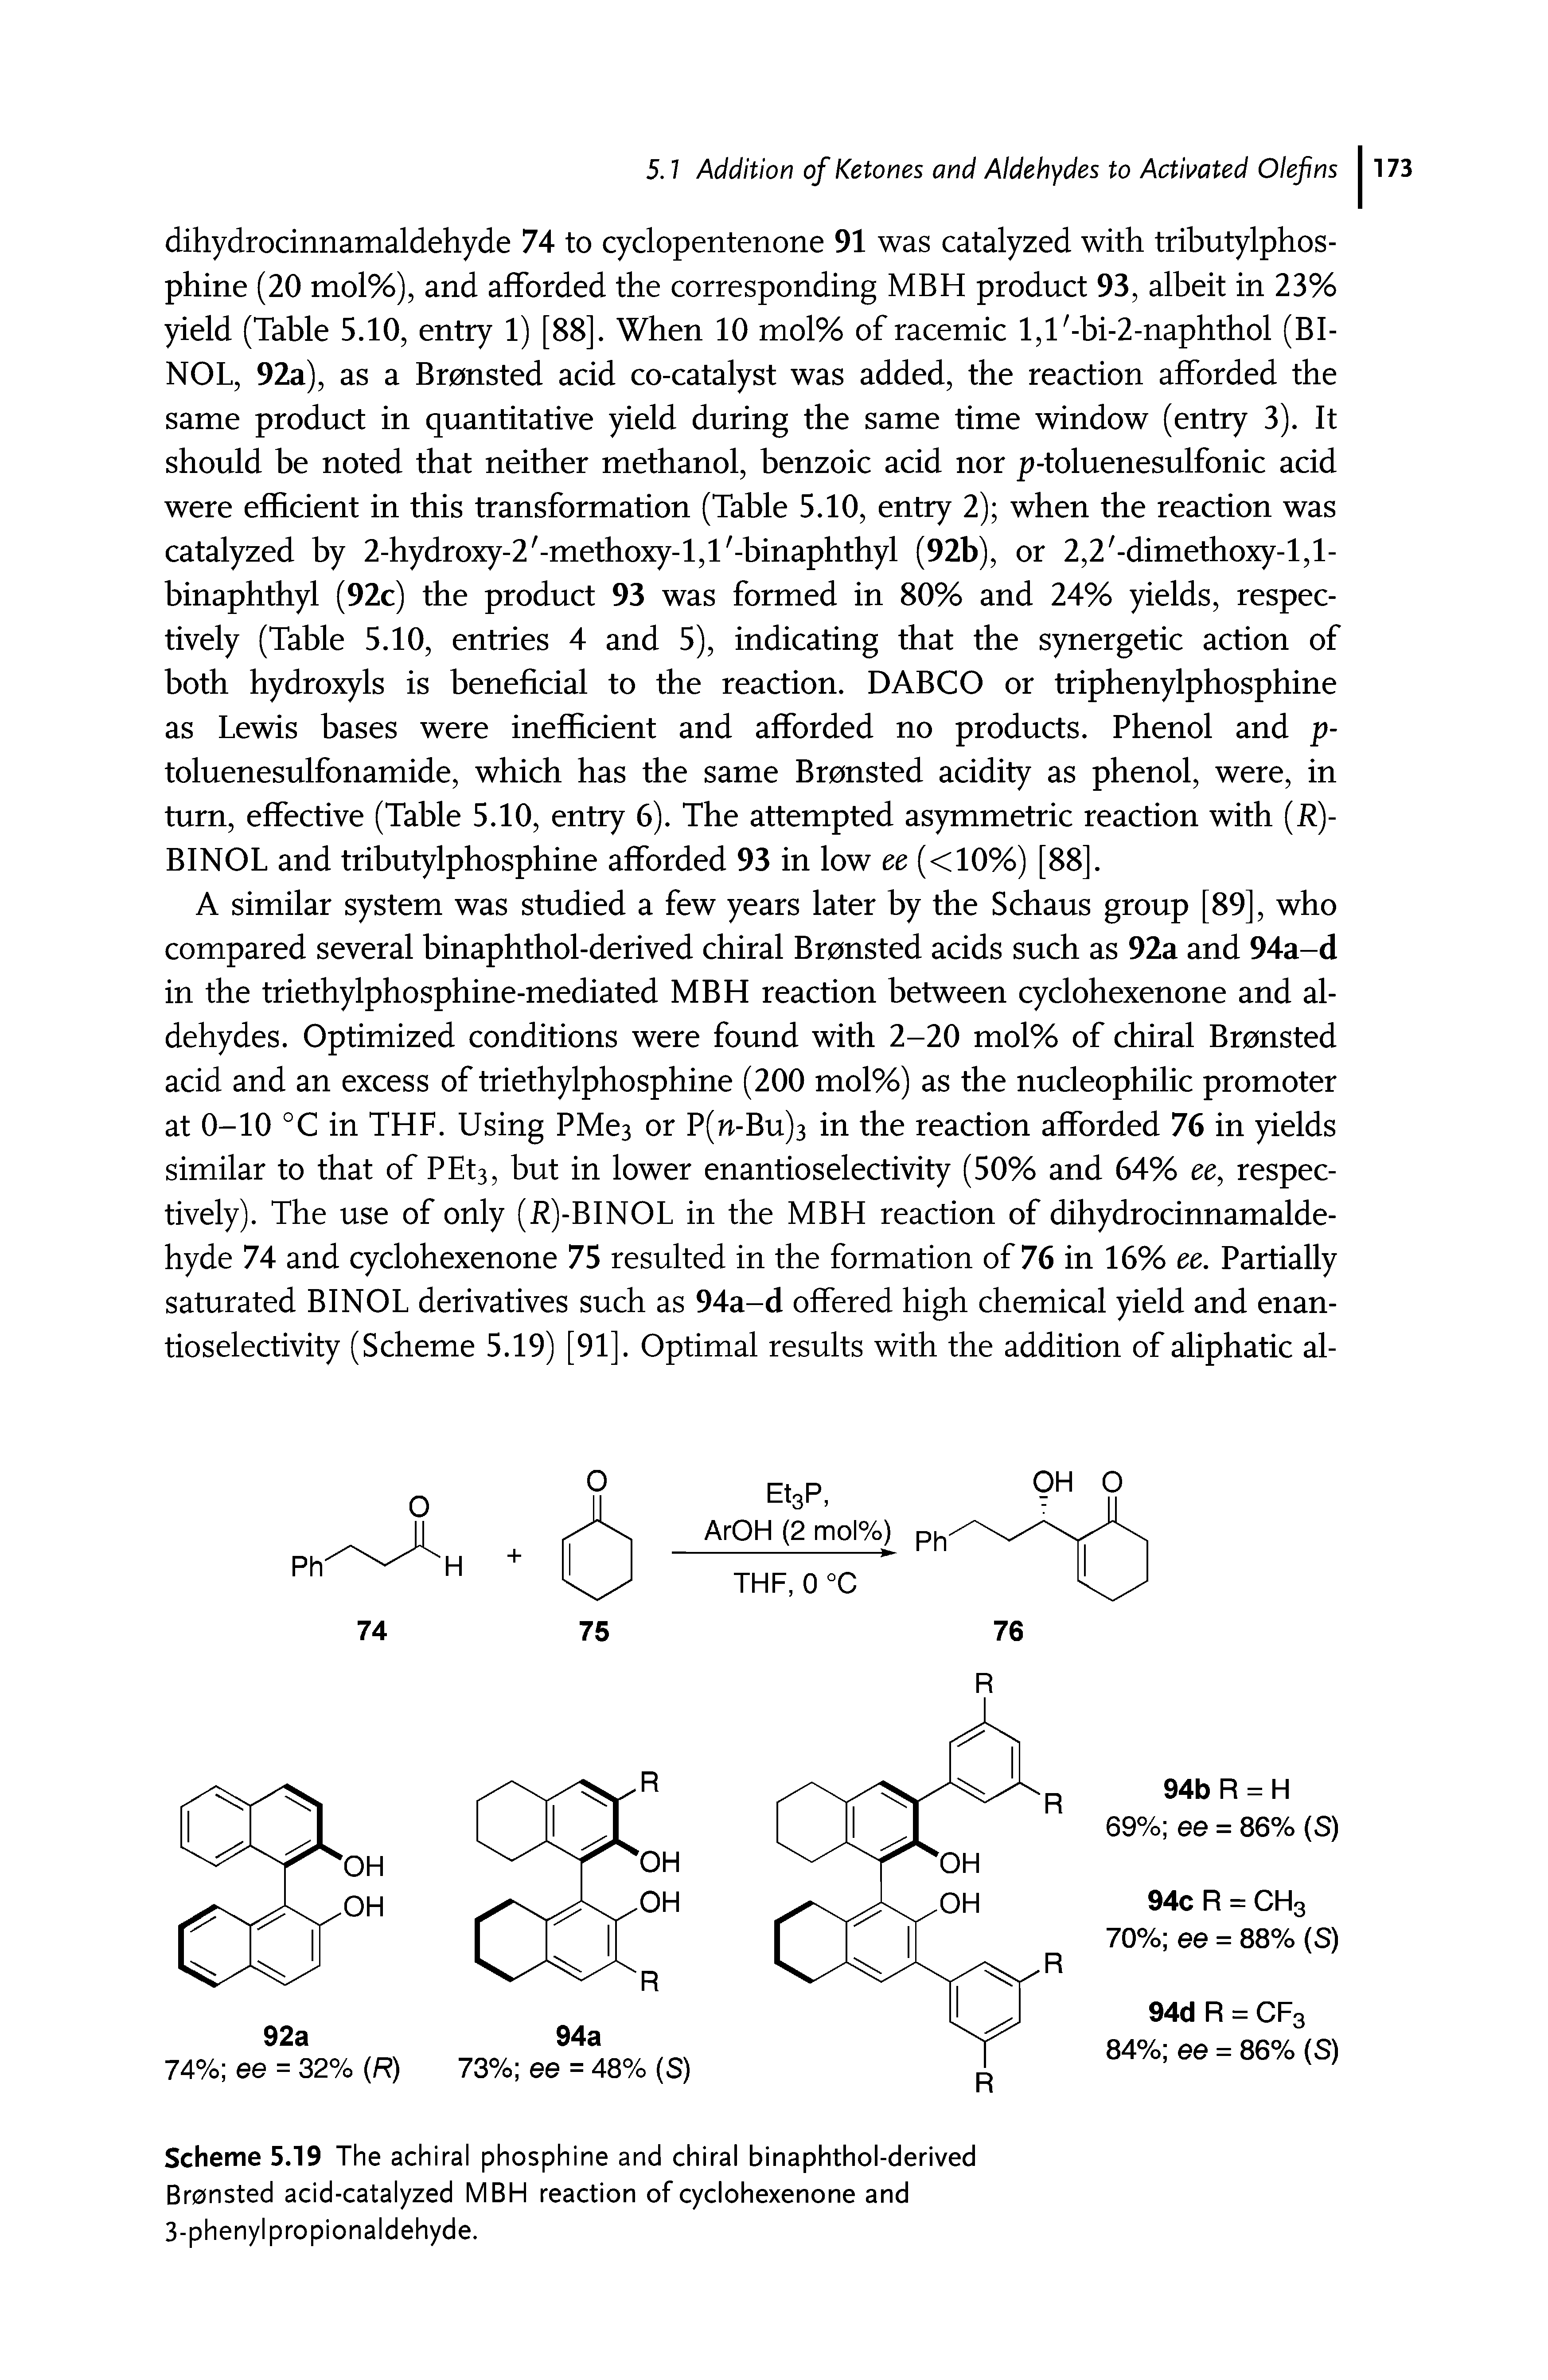 Scheme 5.19 The achiral phosphine and chiral binaphthol-derived Bronsted acid-catalyzed MBH reaction of cyclohexenone and 3-phenyl propionaldehyde.